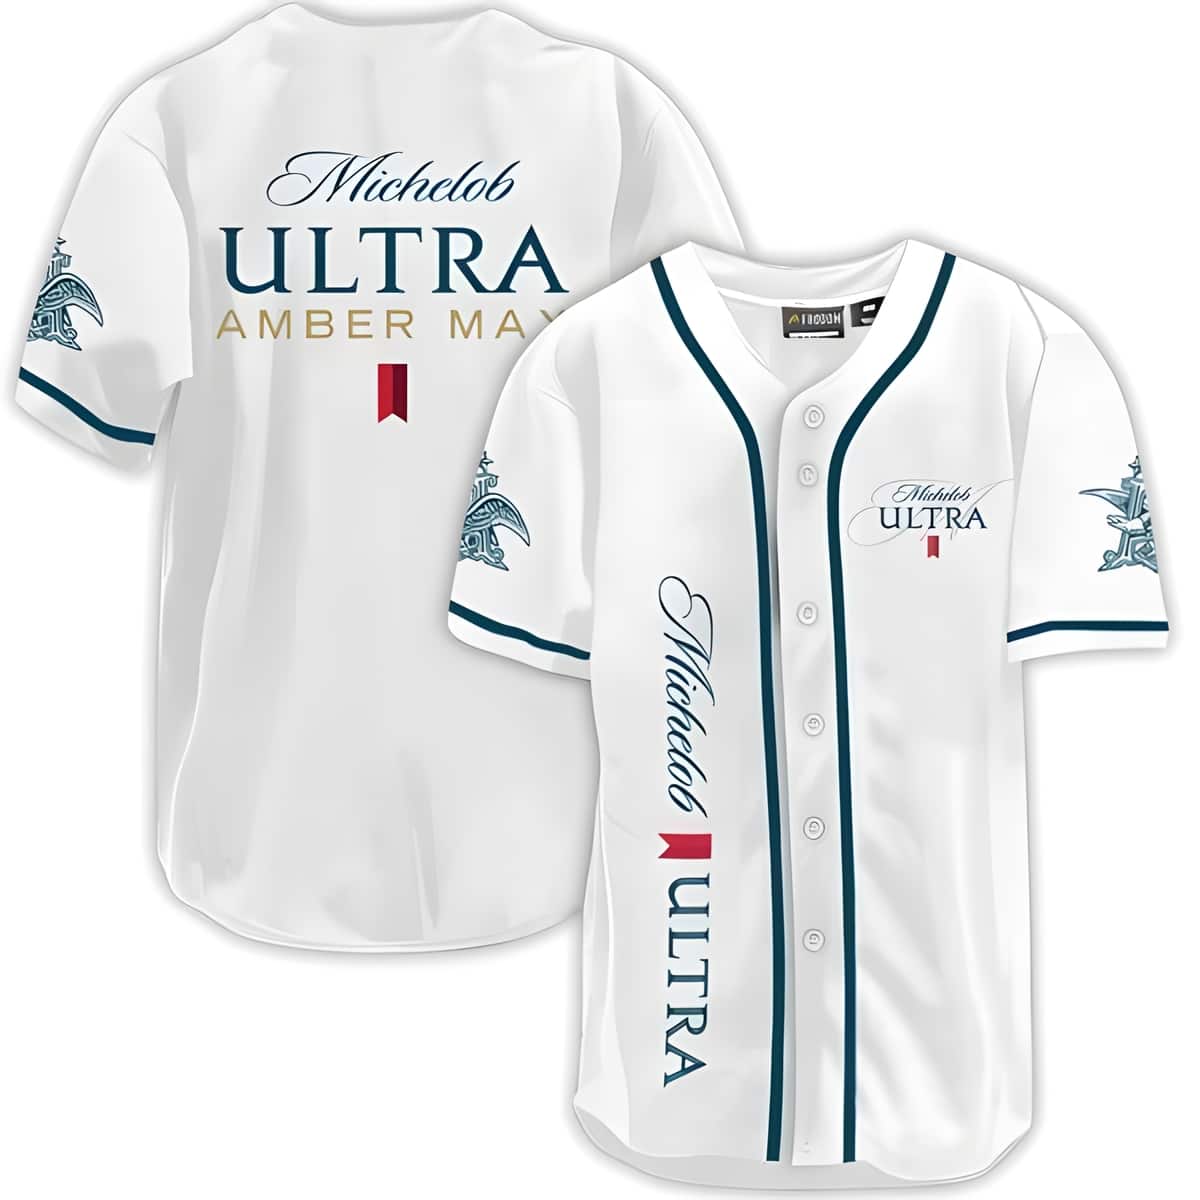 White Michelob ULTRA Baseball Jersey Amber Max Beer Gift For Friends